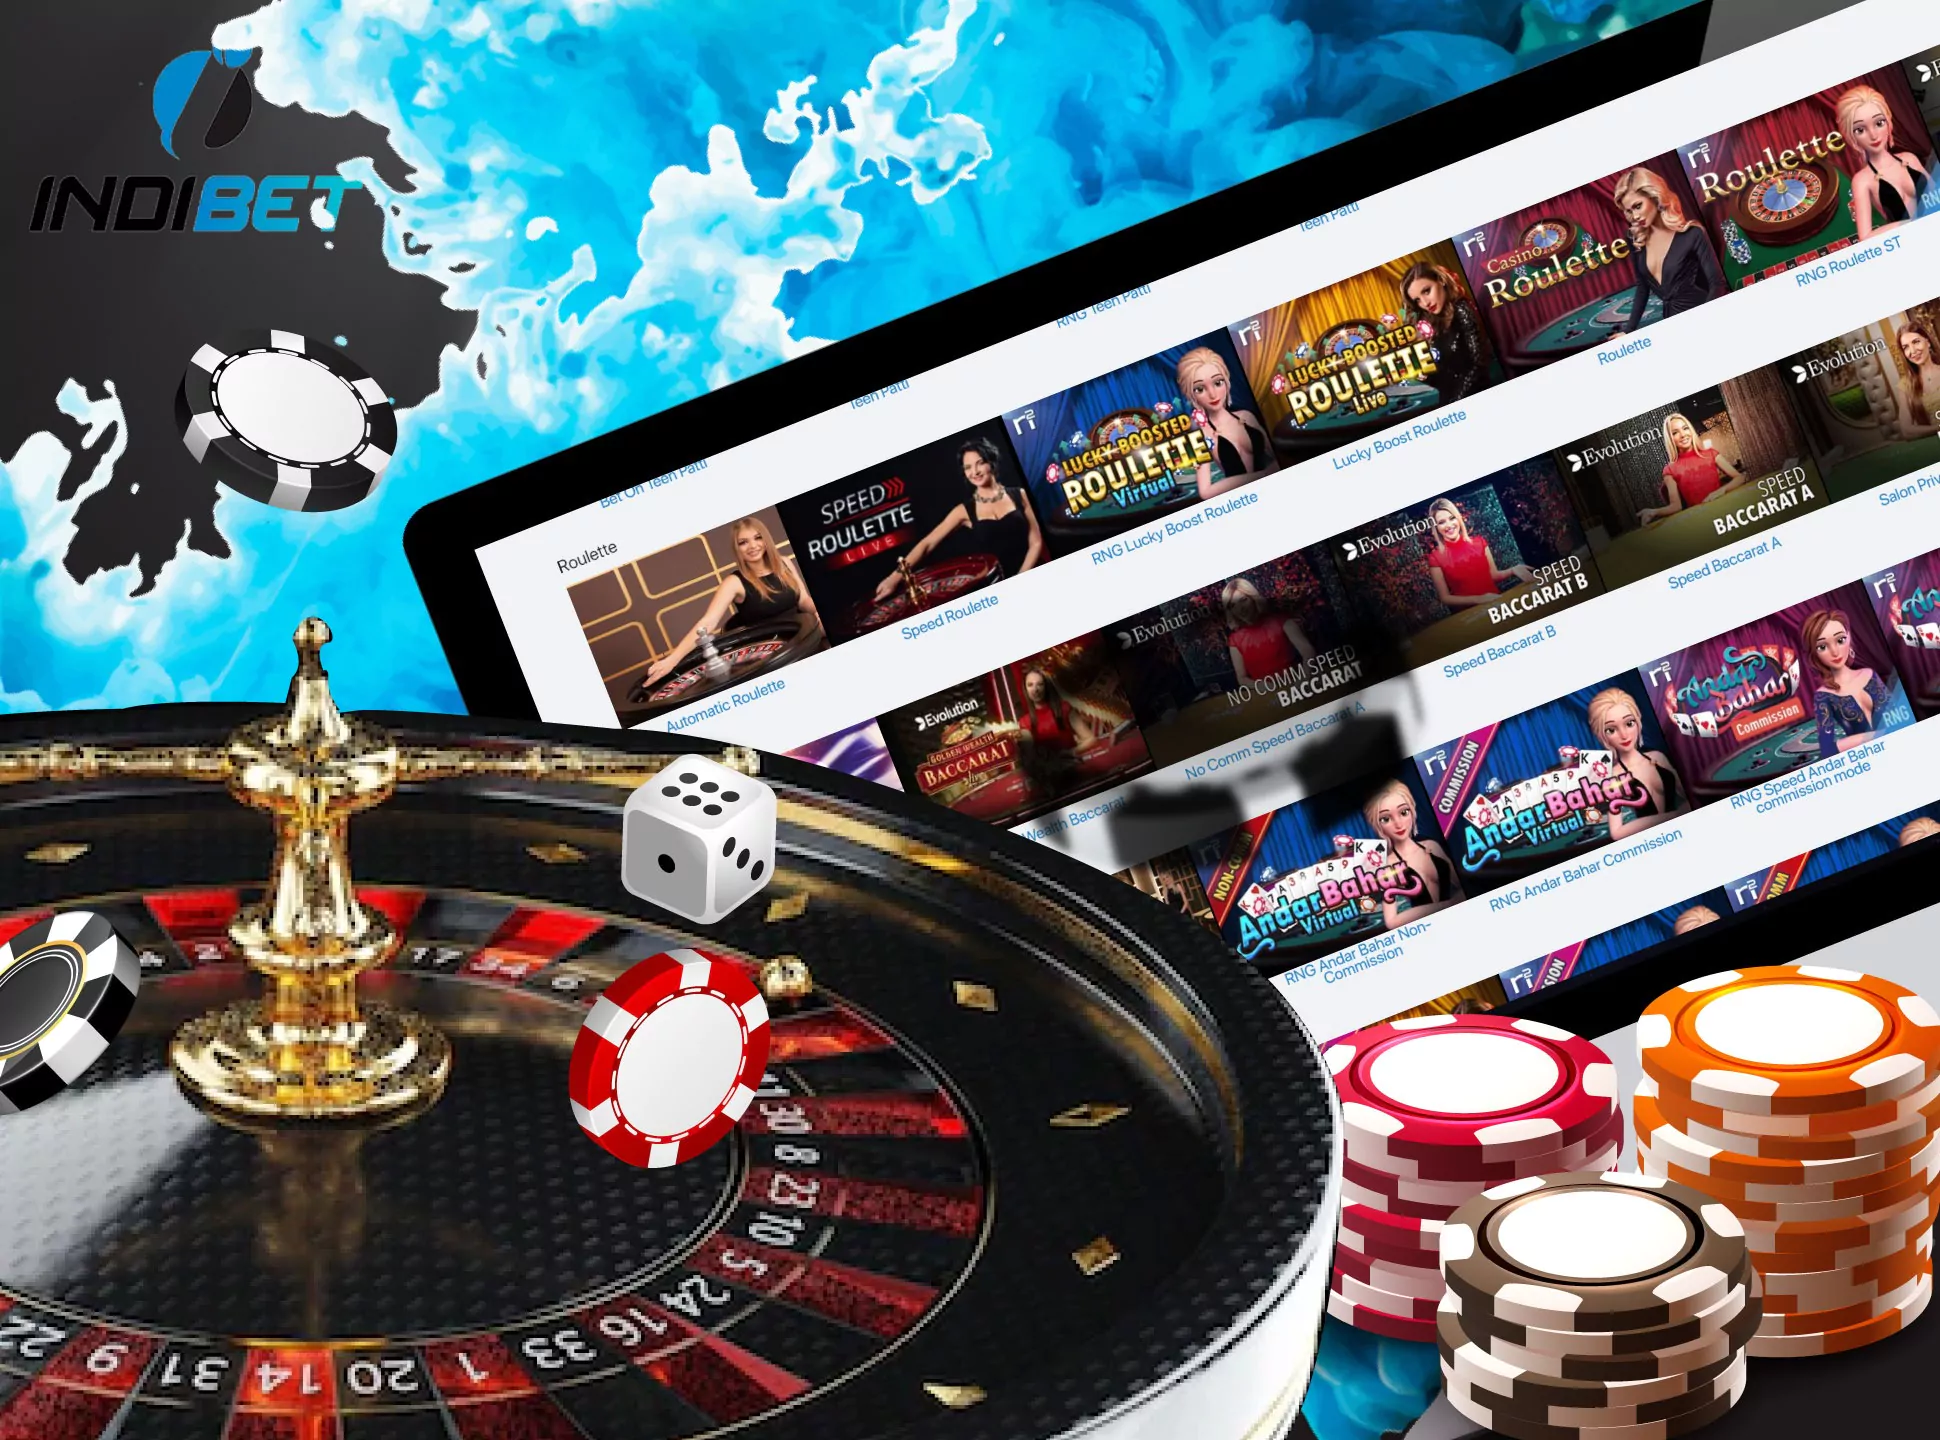 Spin roulette and win money.